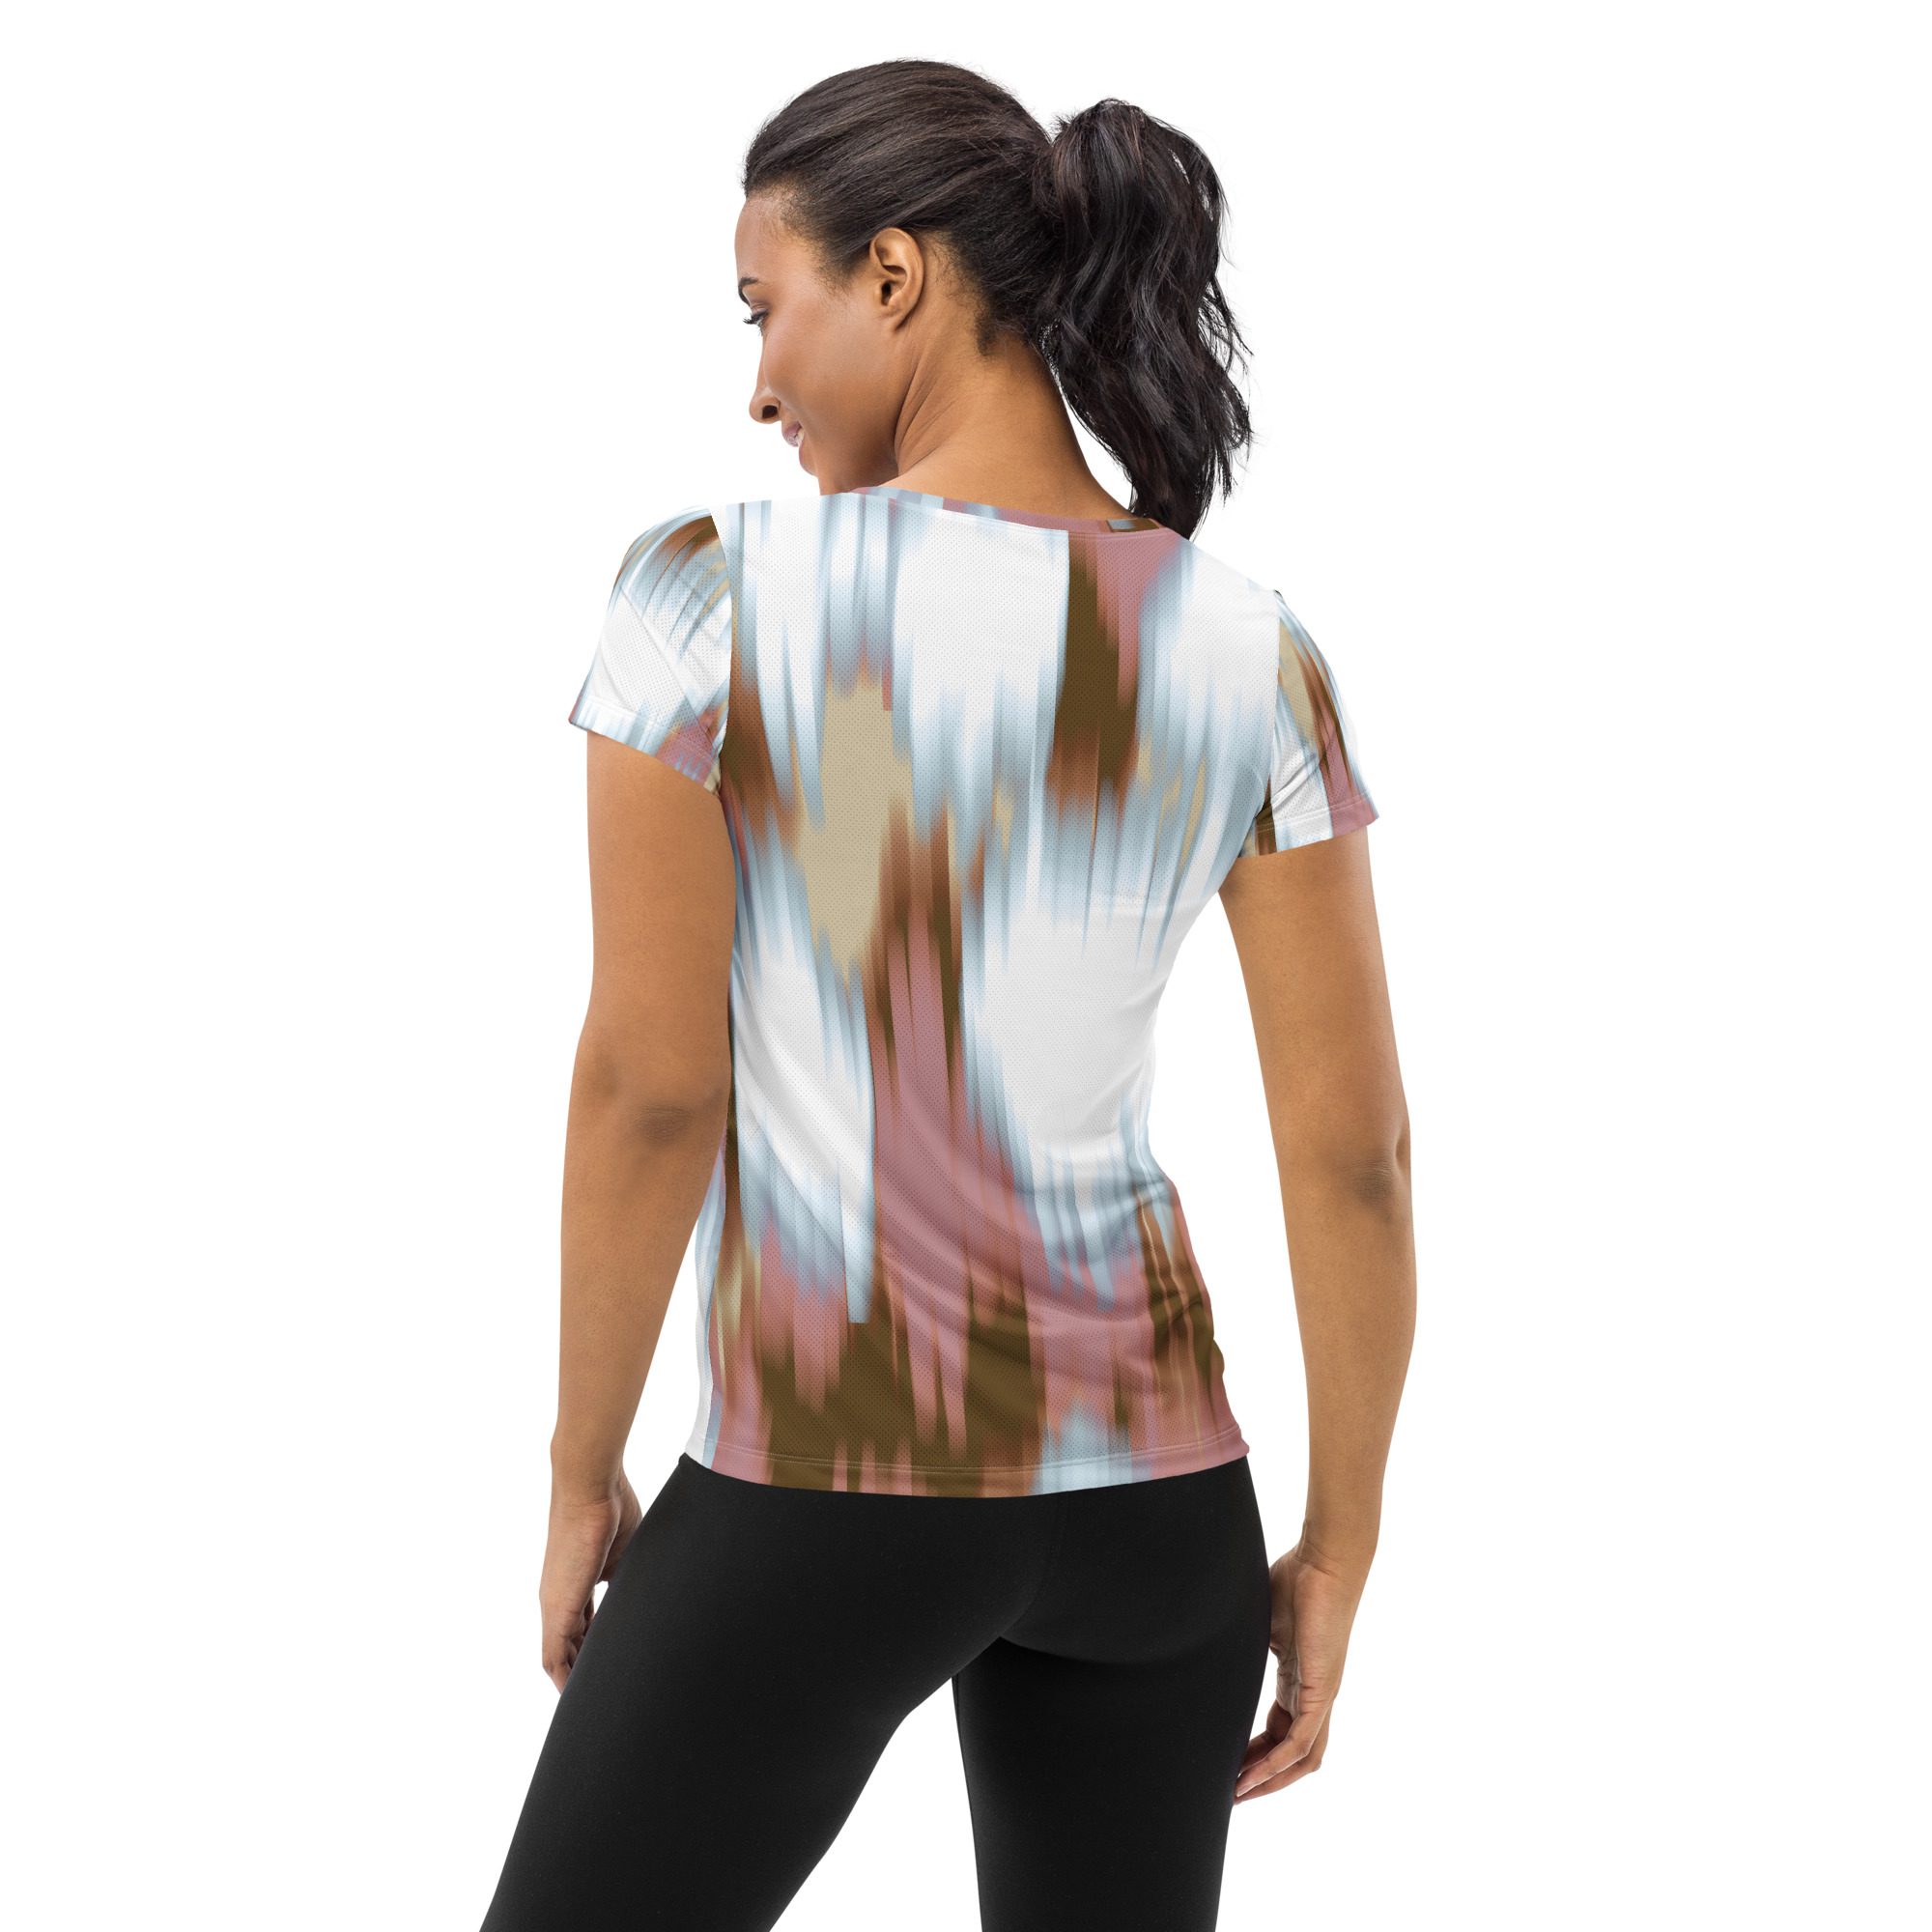 all over print womens athletic t shirt white back 65188bb070b78